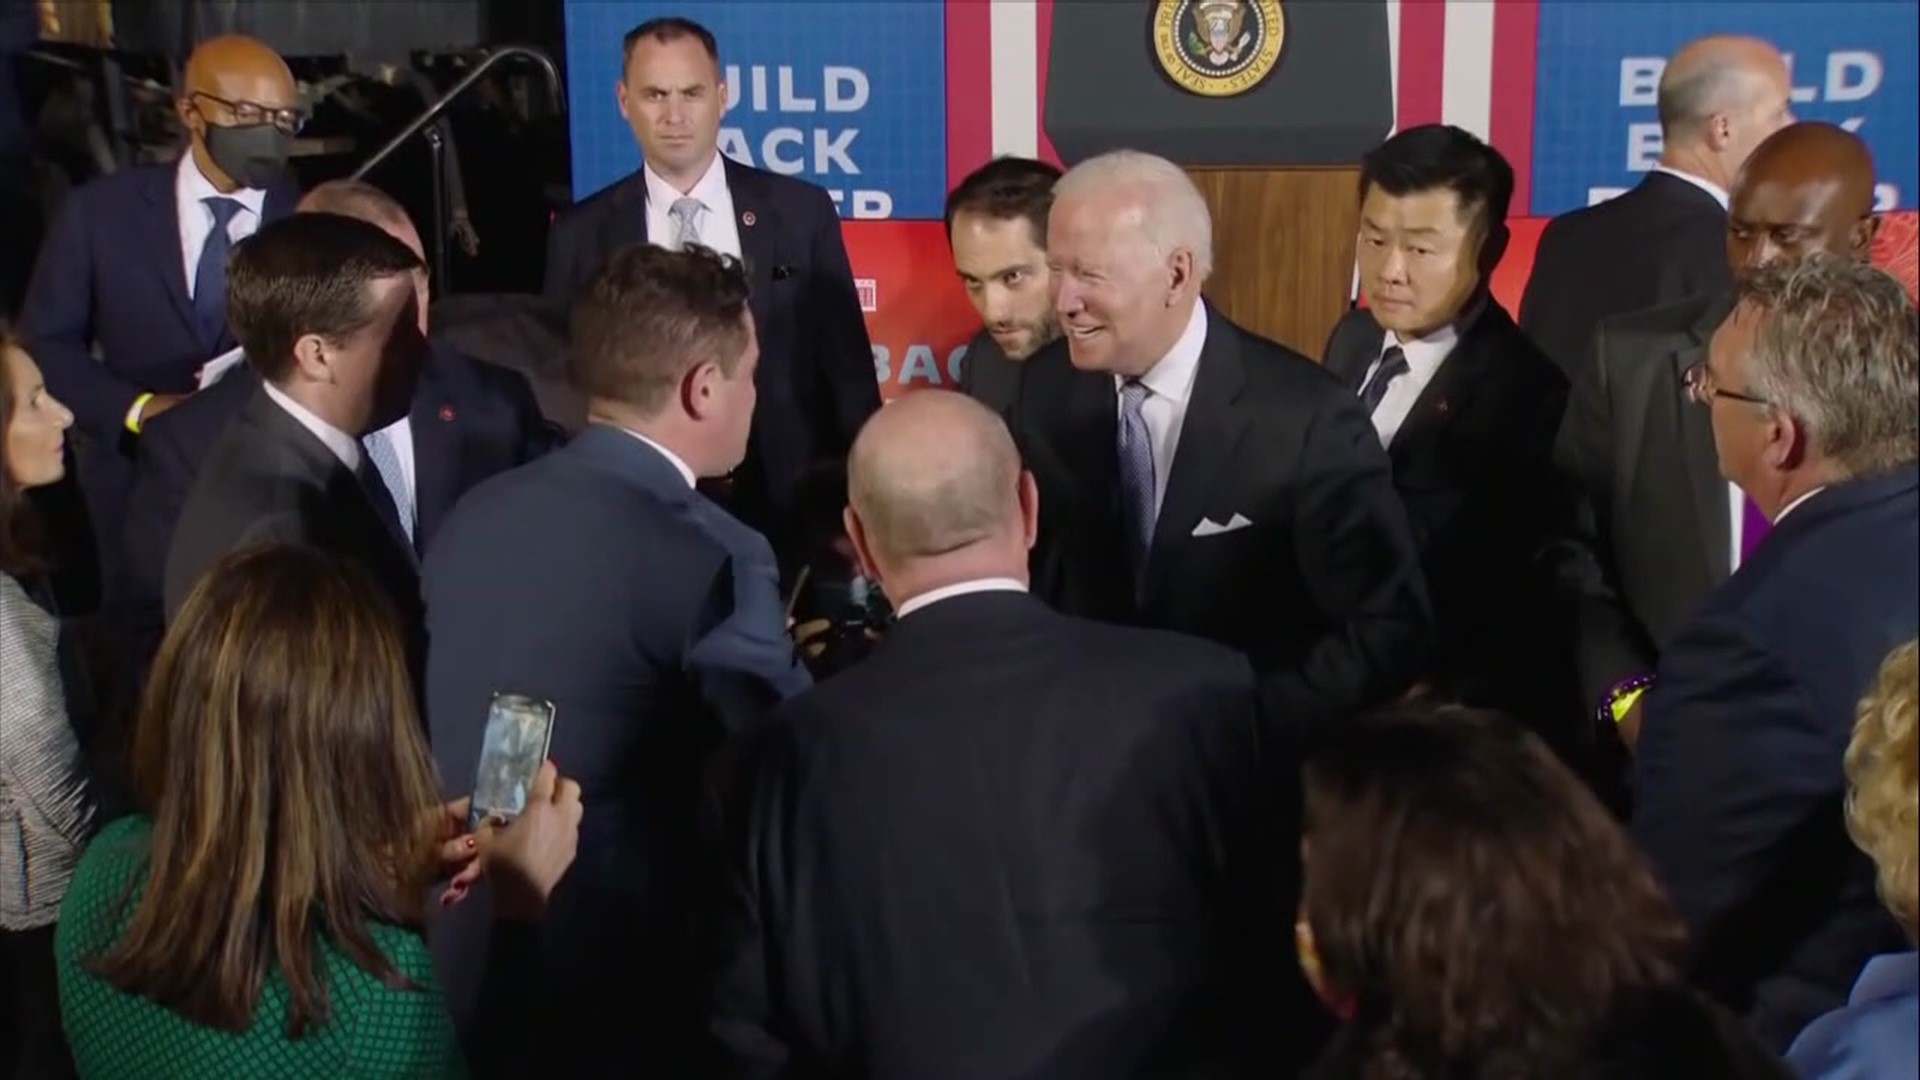 President Joe Biden was in Scranton for a visit Wednesday, greeting some familiar faces in the process.